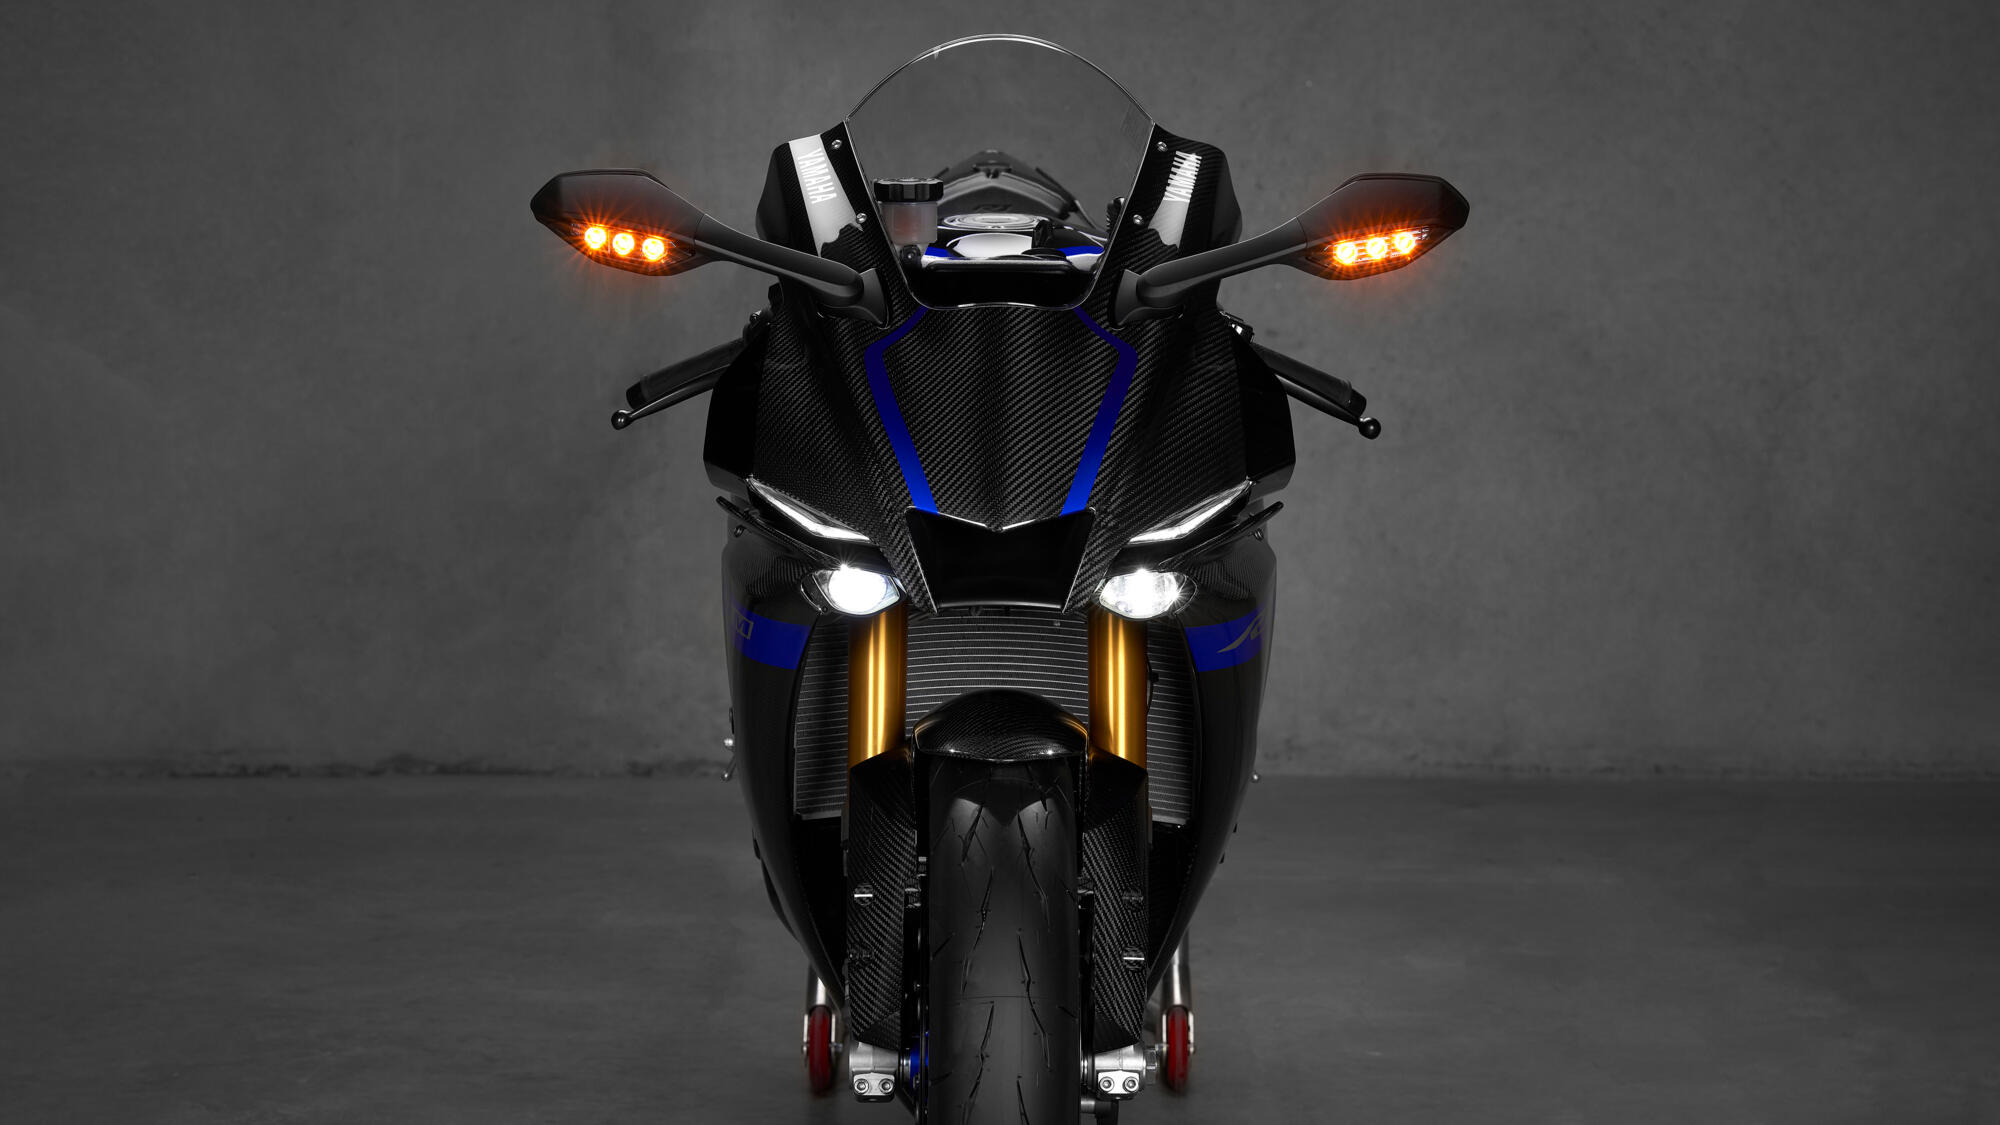 Next generation Yamaha R1 to arrive by end of the Visordown